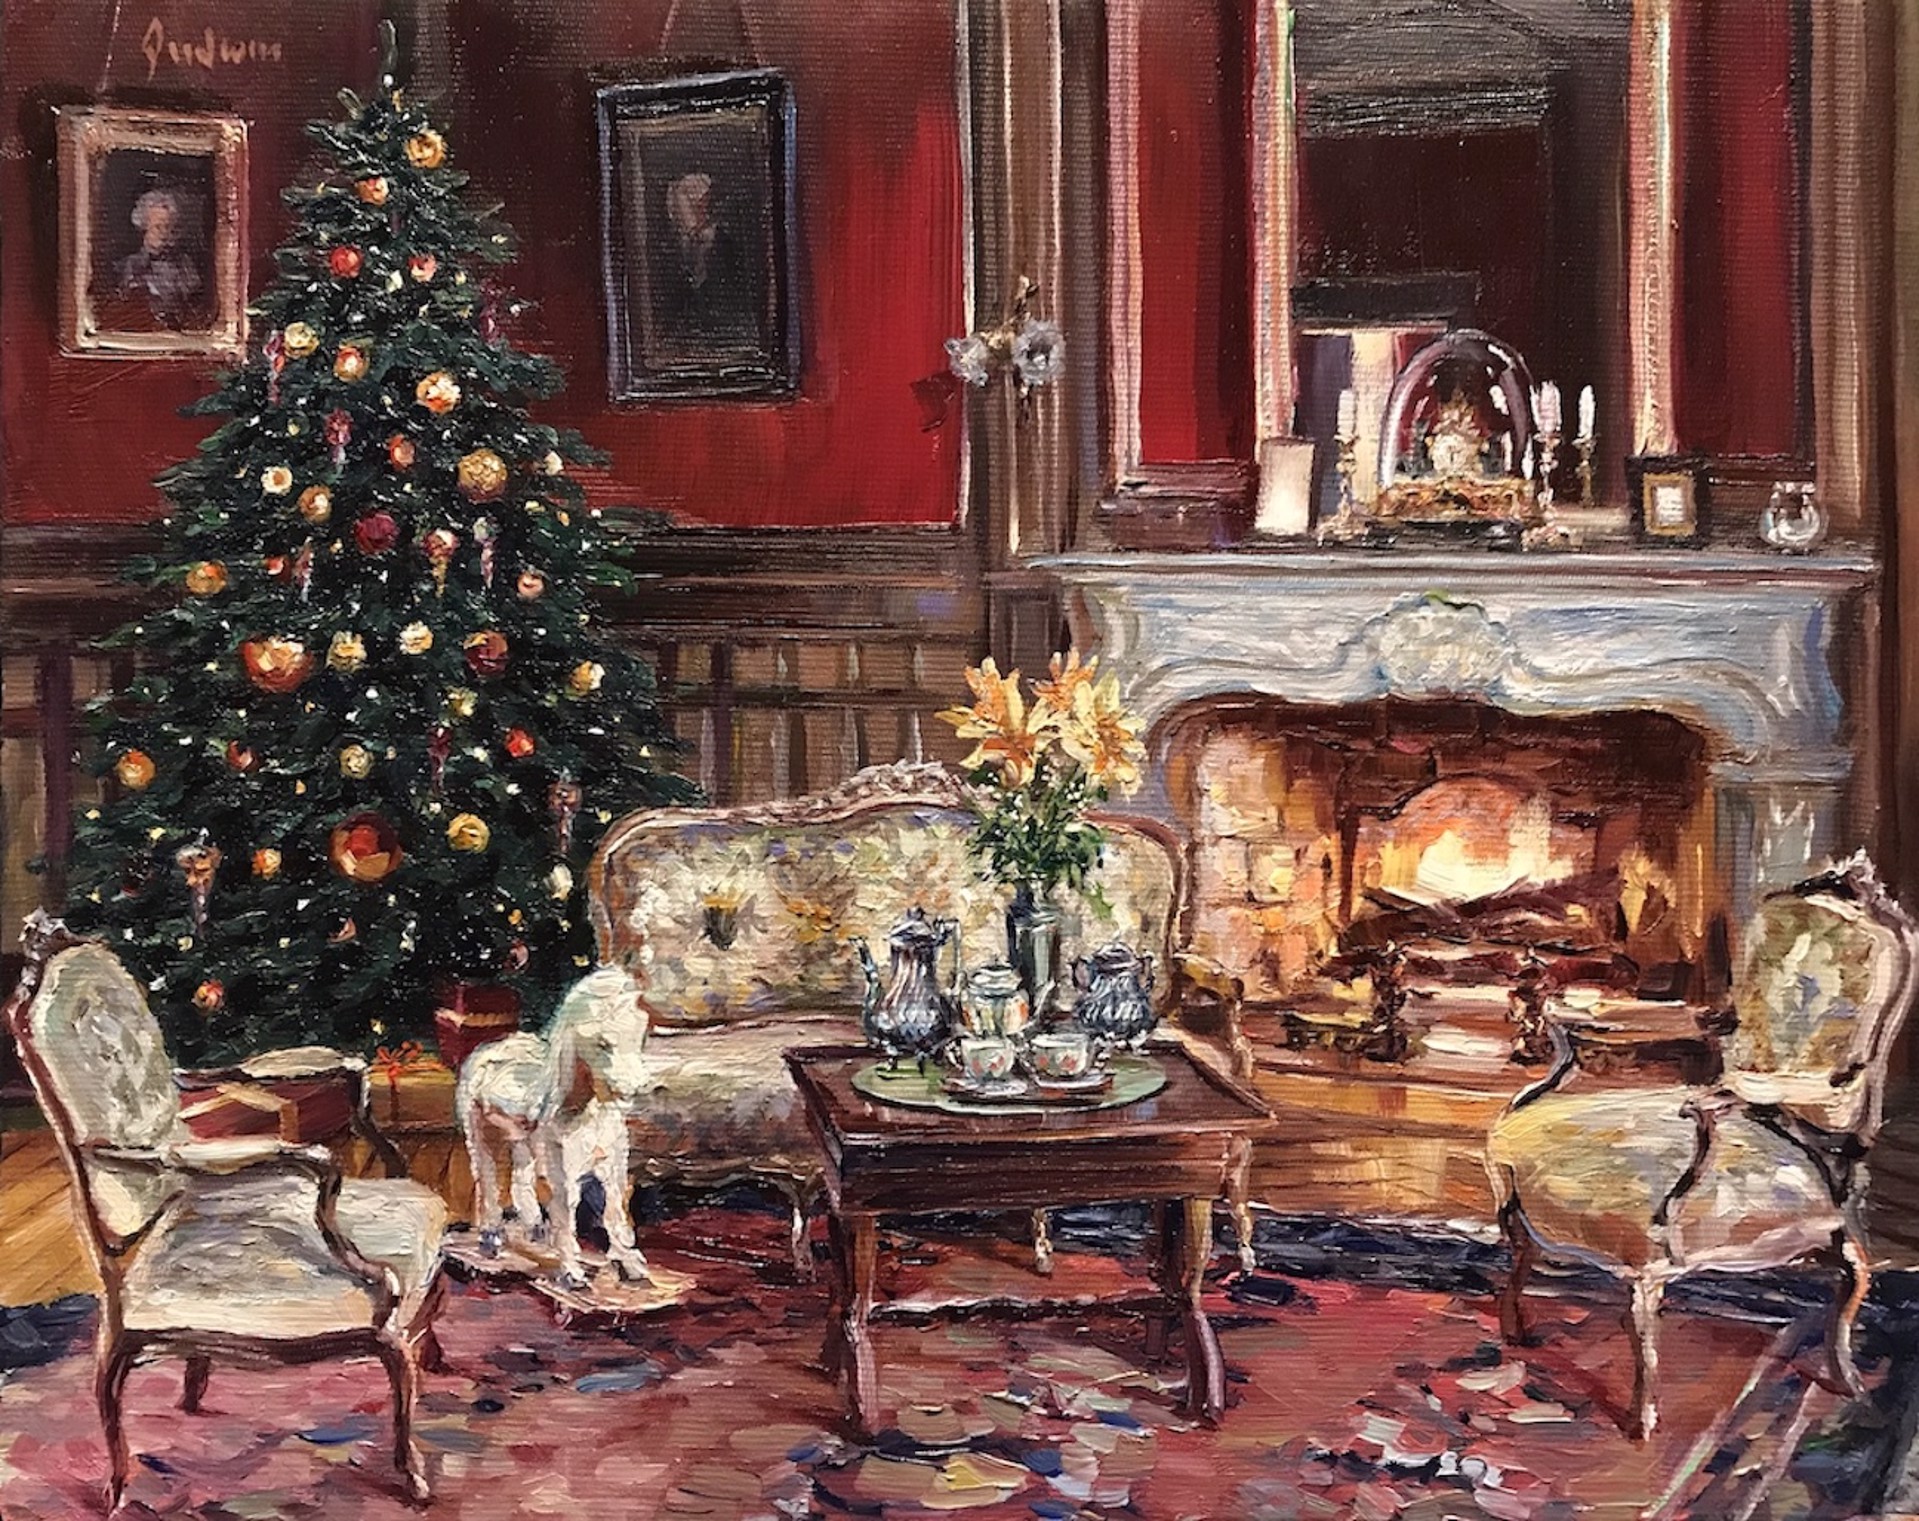 Christmas Around the Fire at Chateau Bridoire by Lindsay Goodwin